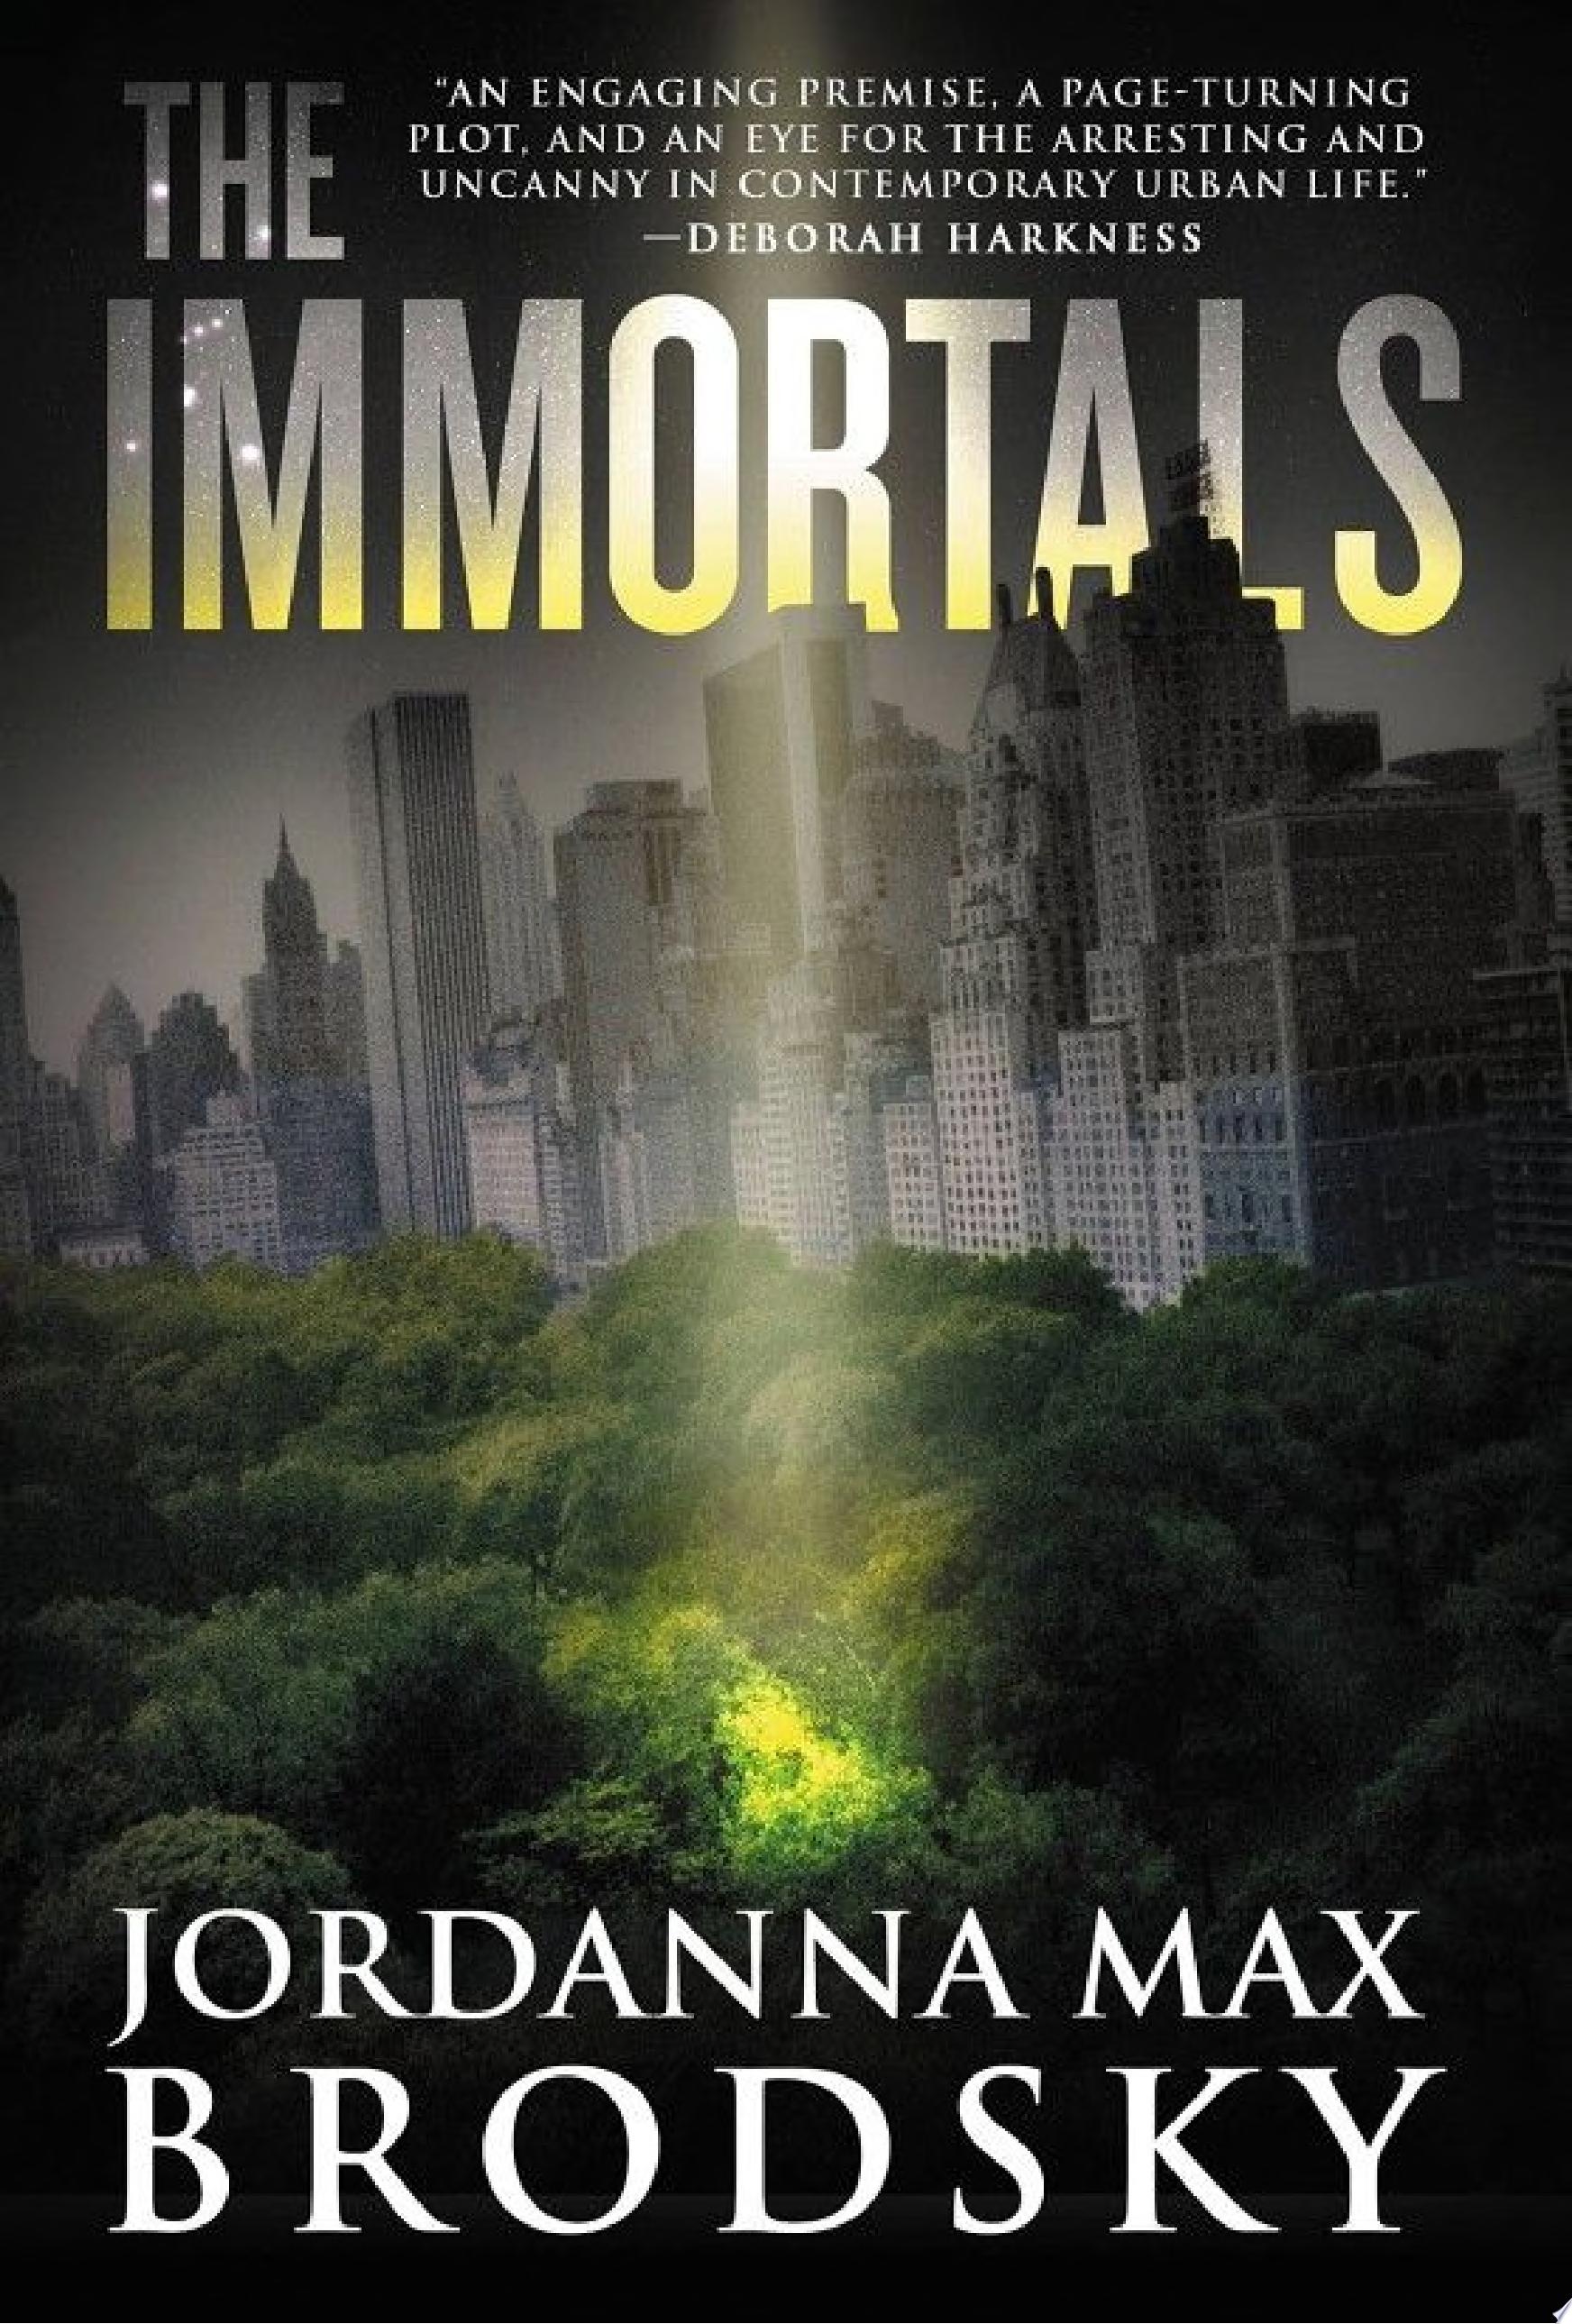 Image for "The Immortals"